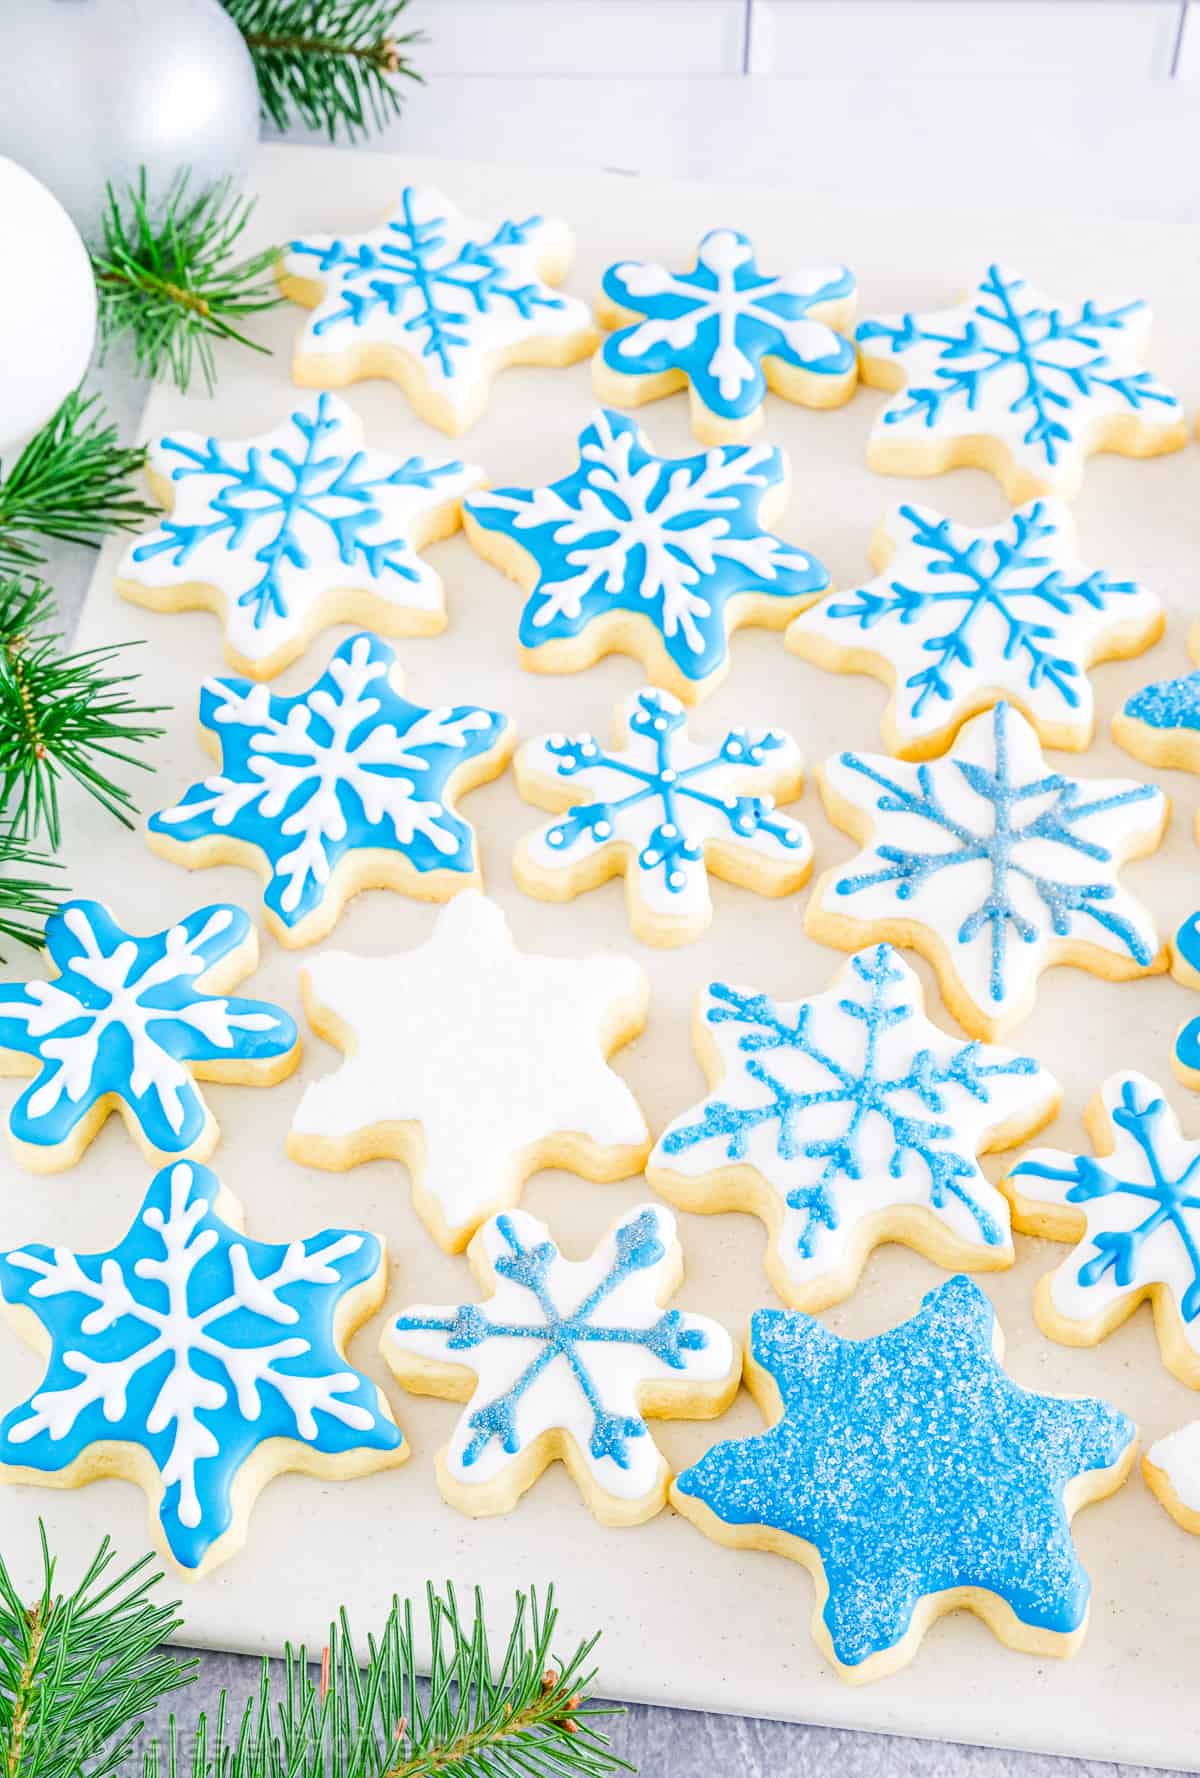 These cookies are perfect for Christmas when you’re looking to get the winter feel at home. They not only look great but taste great too!